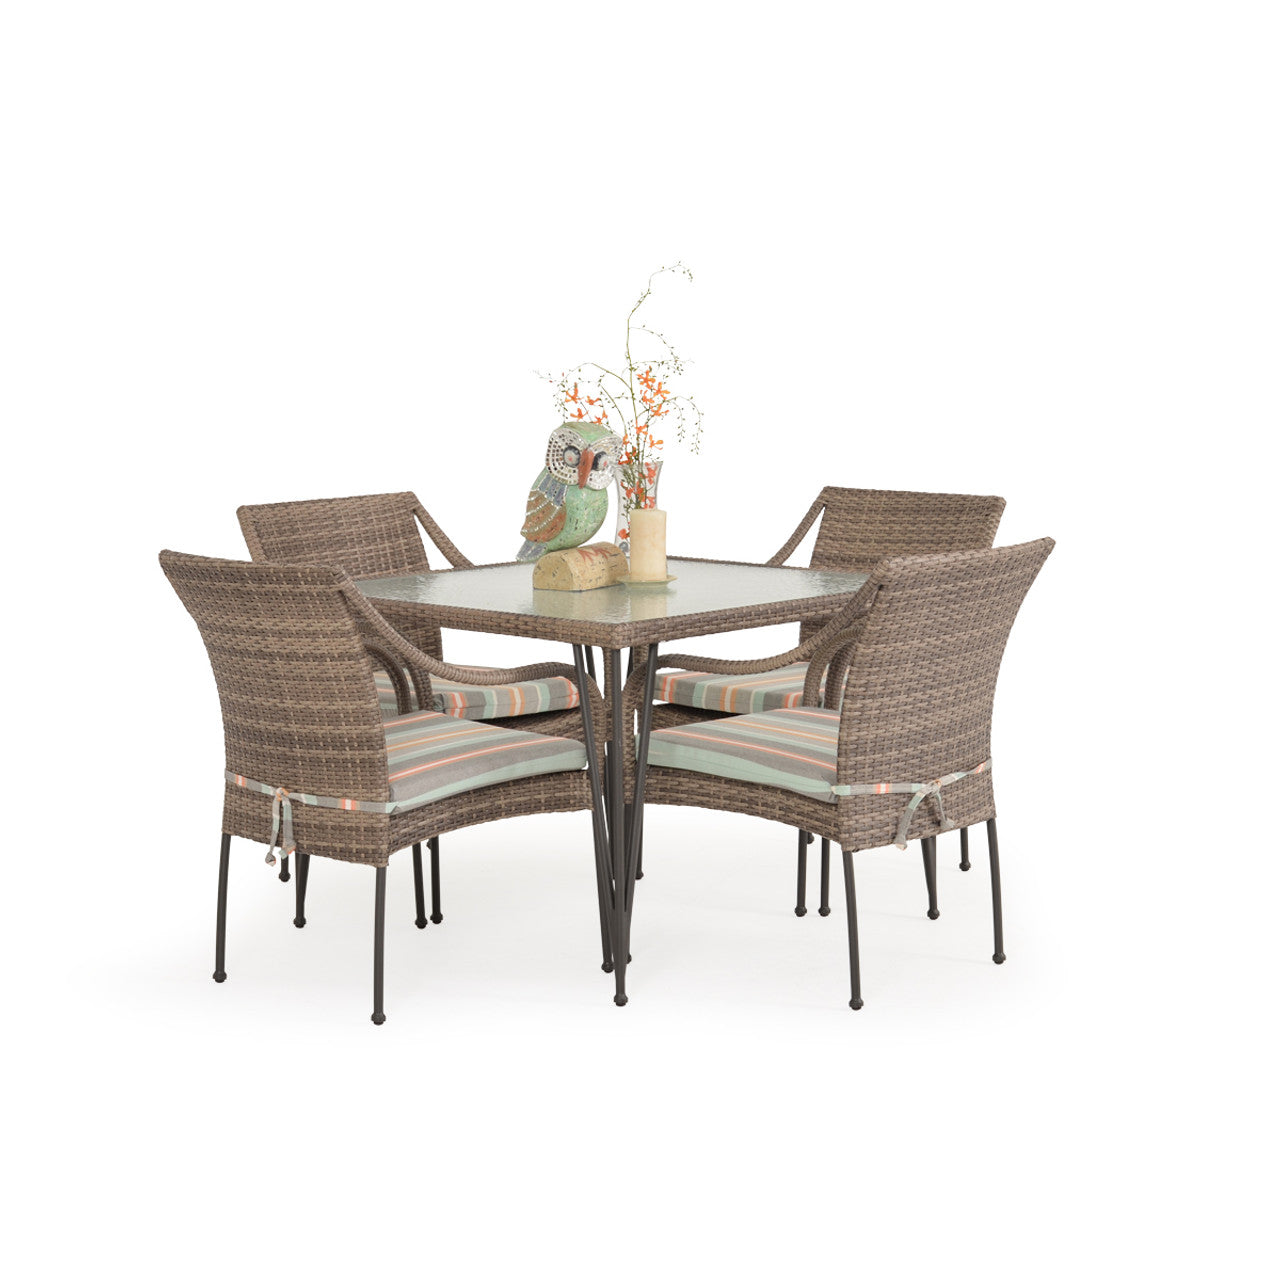 Leaders Furniture Garden Terrace Outdoor Wicker 39" Square Dining Table